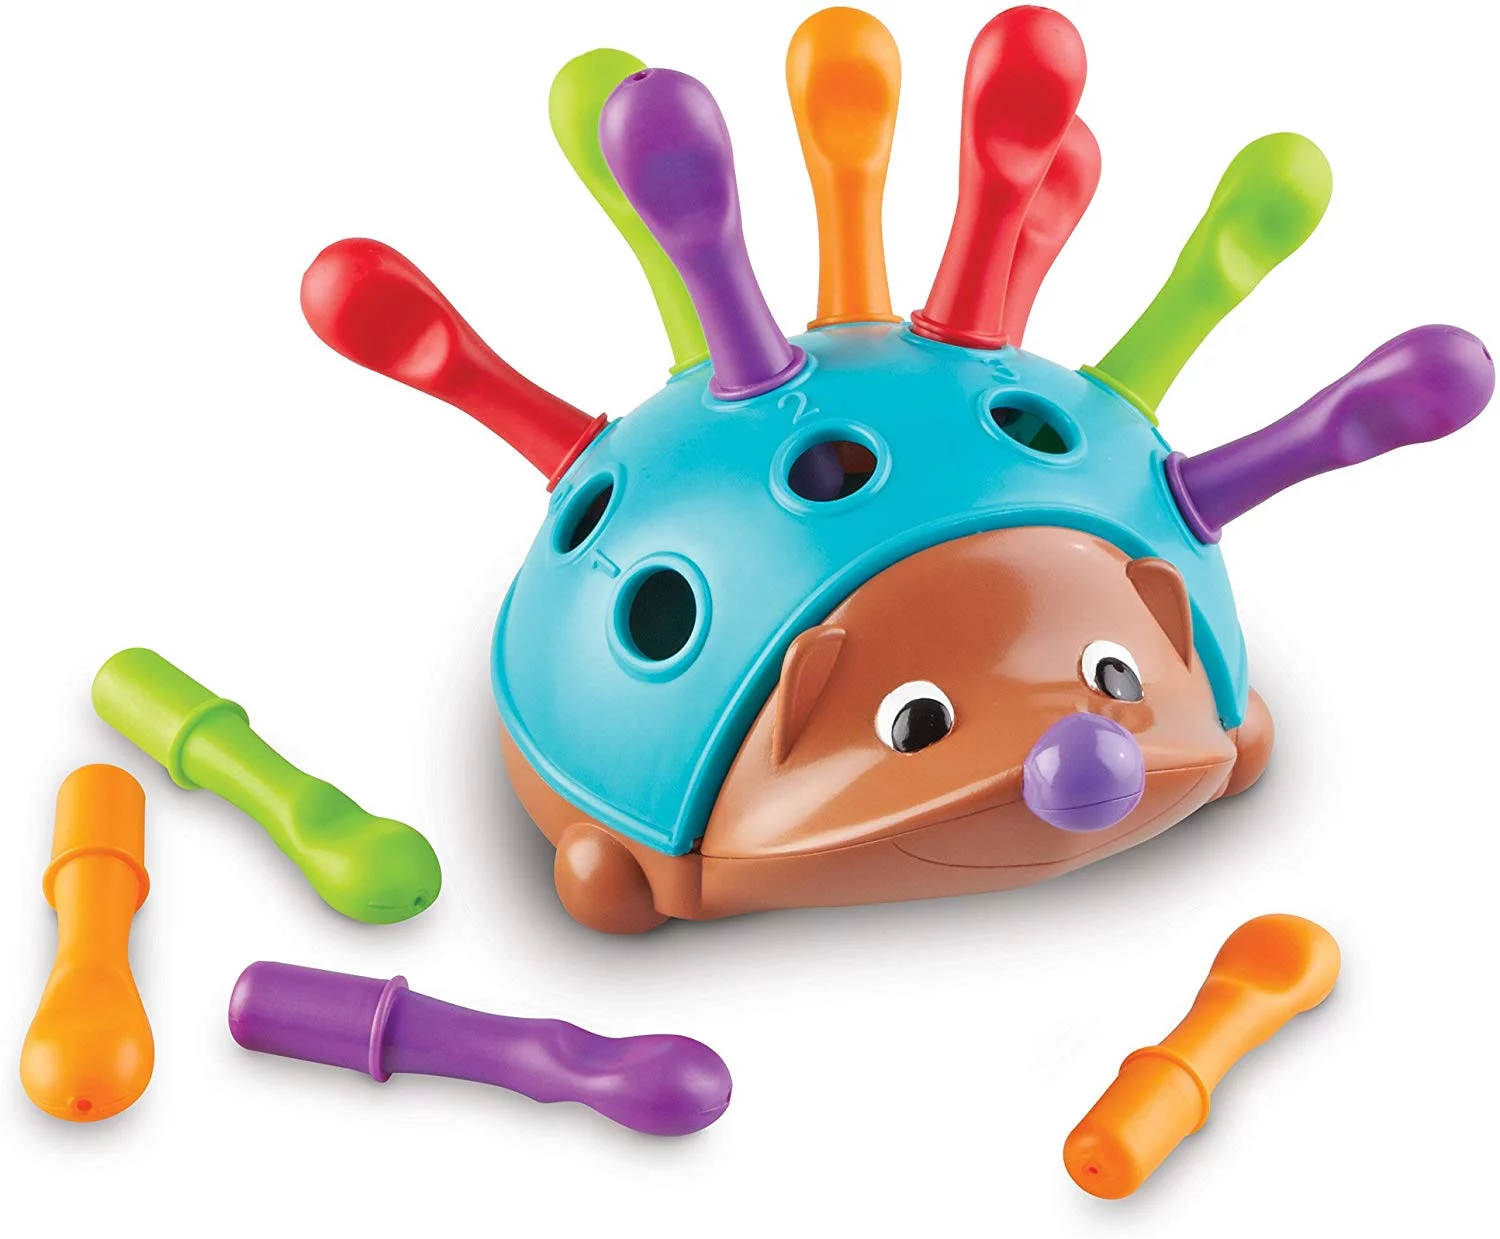 Best Gifts For Two Year Old 2022: Spike the Hedgehog Toy 2022